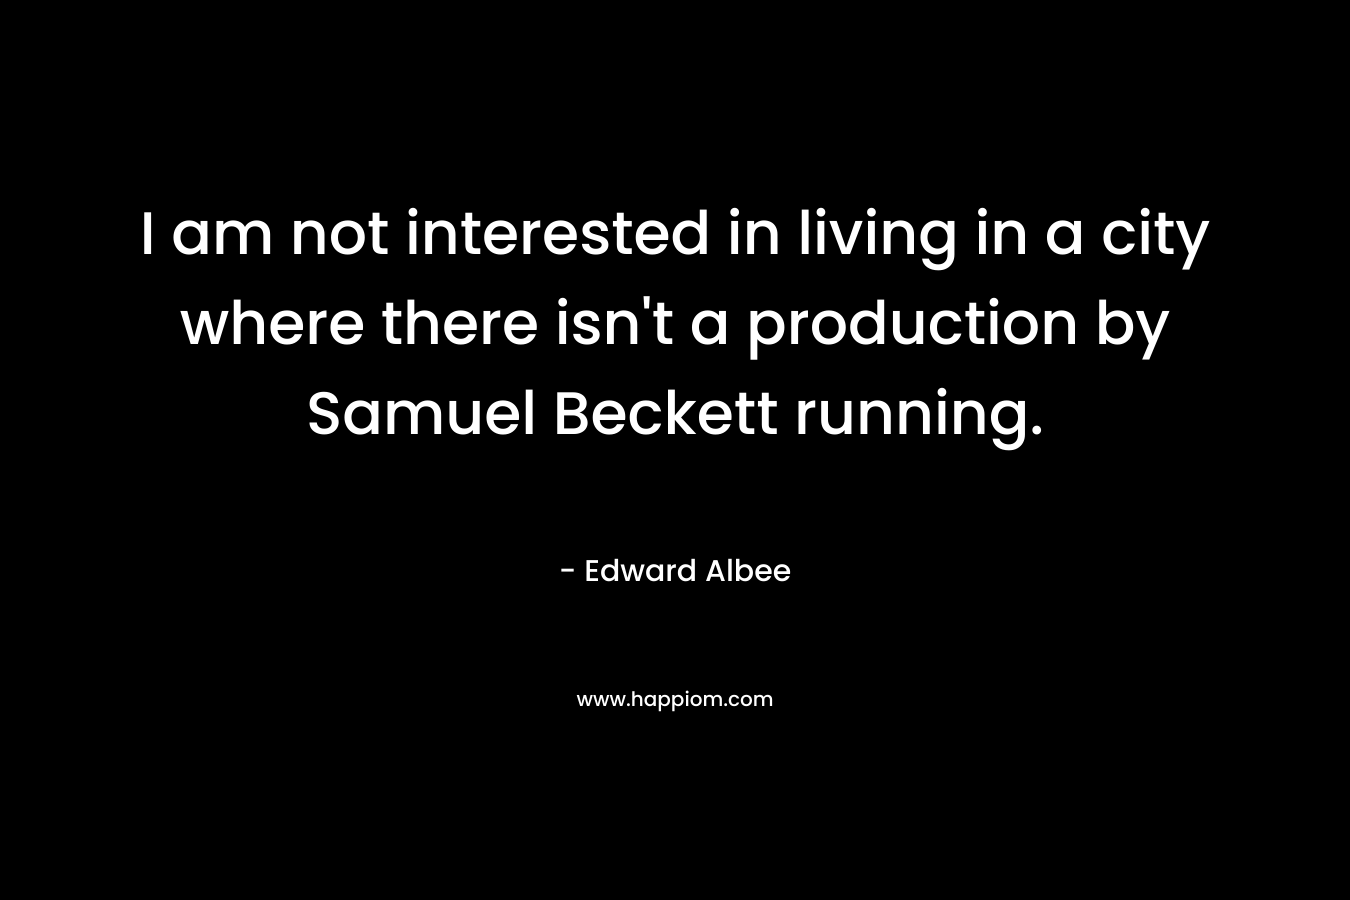 I am not interested in living in a city where there isn’t a production by Samuel Beckett running. – Edward Albee